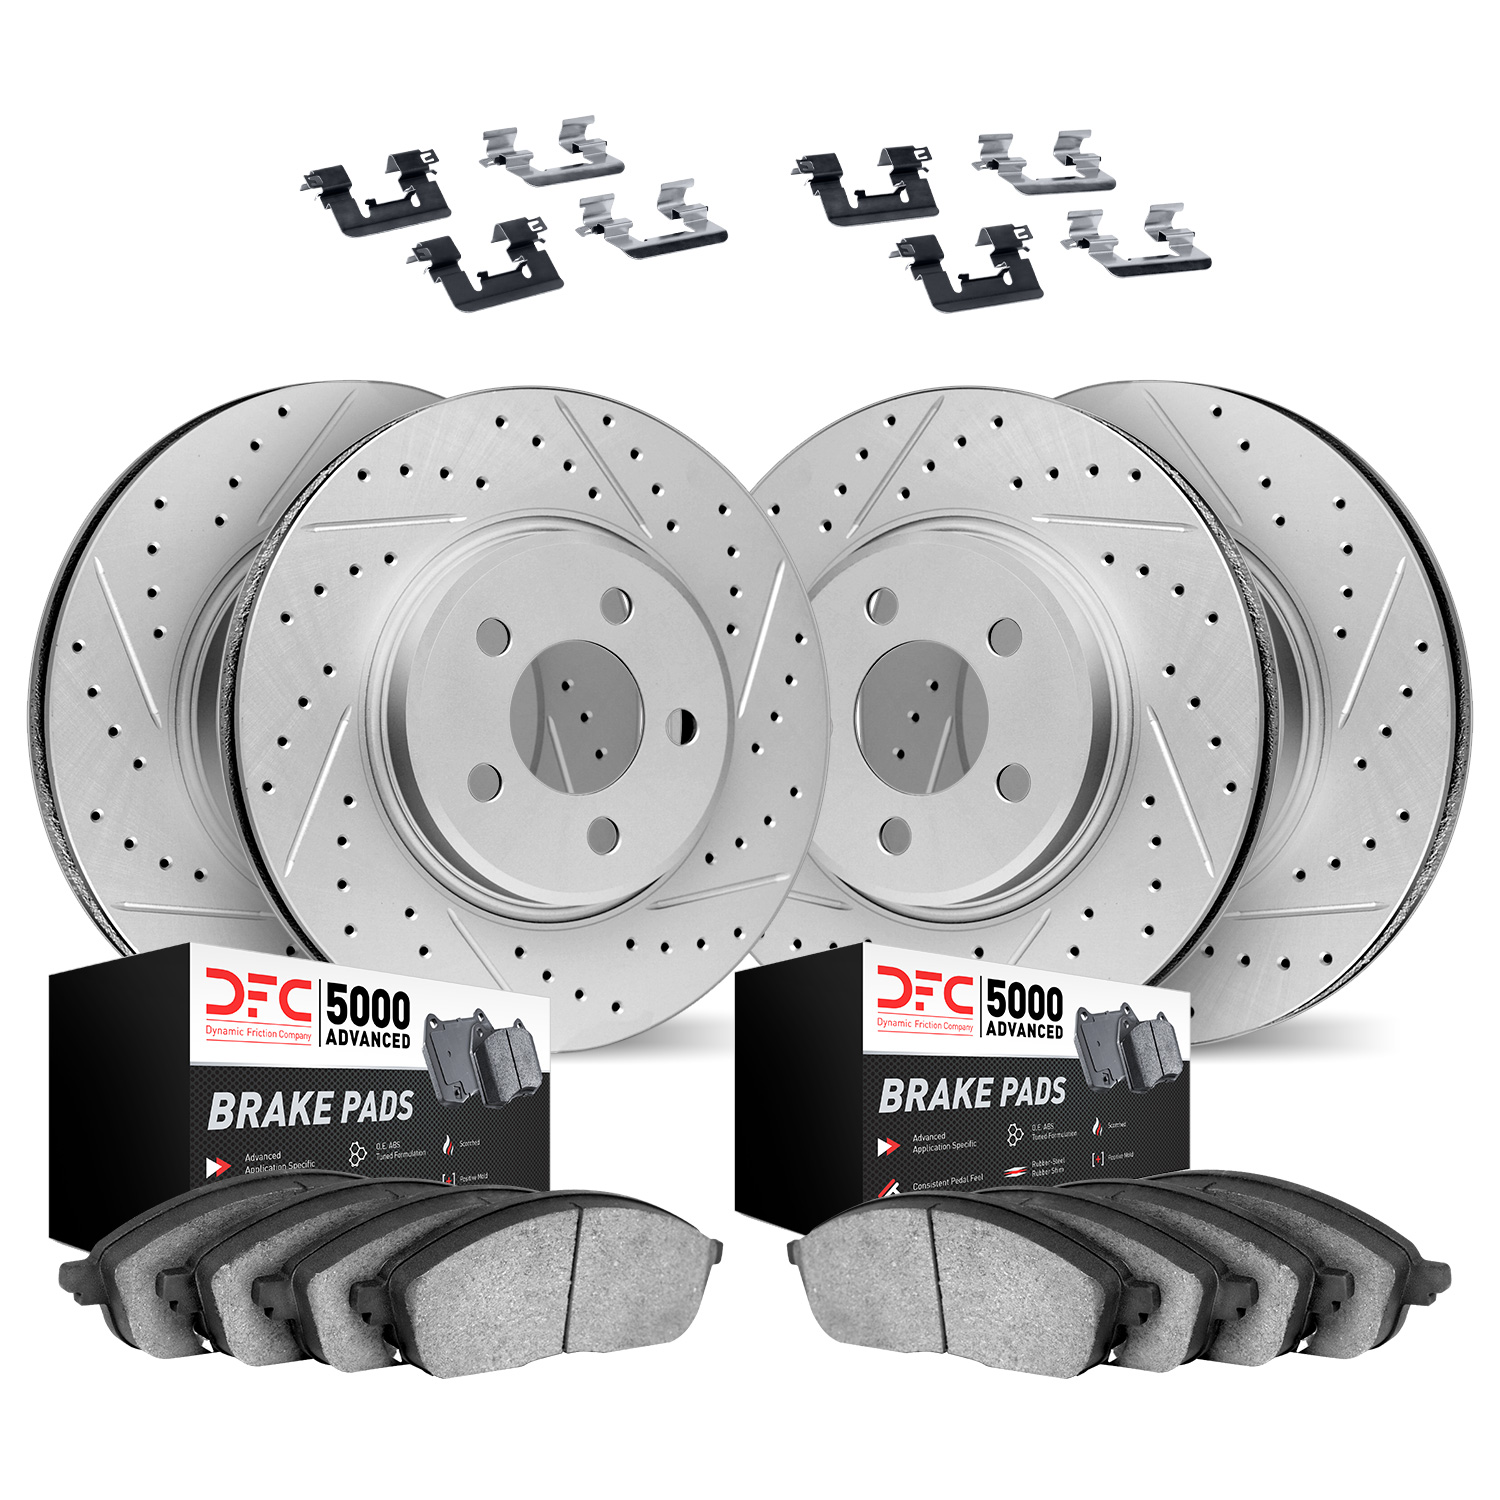 2514-47294 Geoperformance Drilled/Slotted Rotors w/5000 Advanced Brake Pads Kit & Hardware, 1963-1982 GM, Position: Front and Re